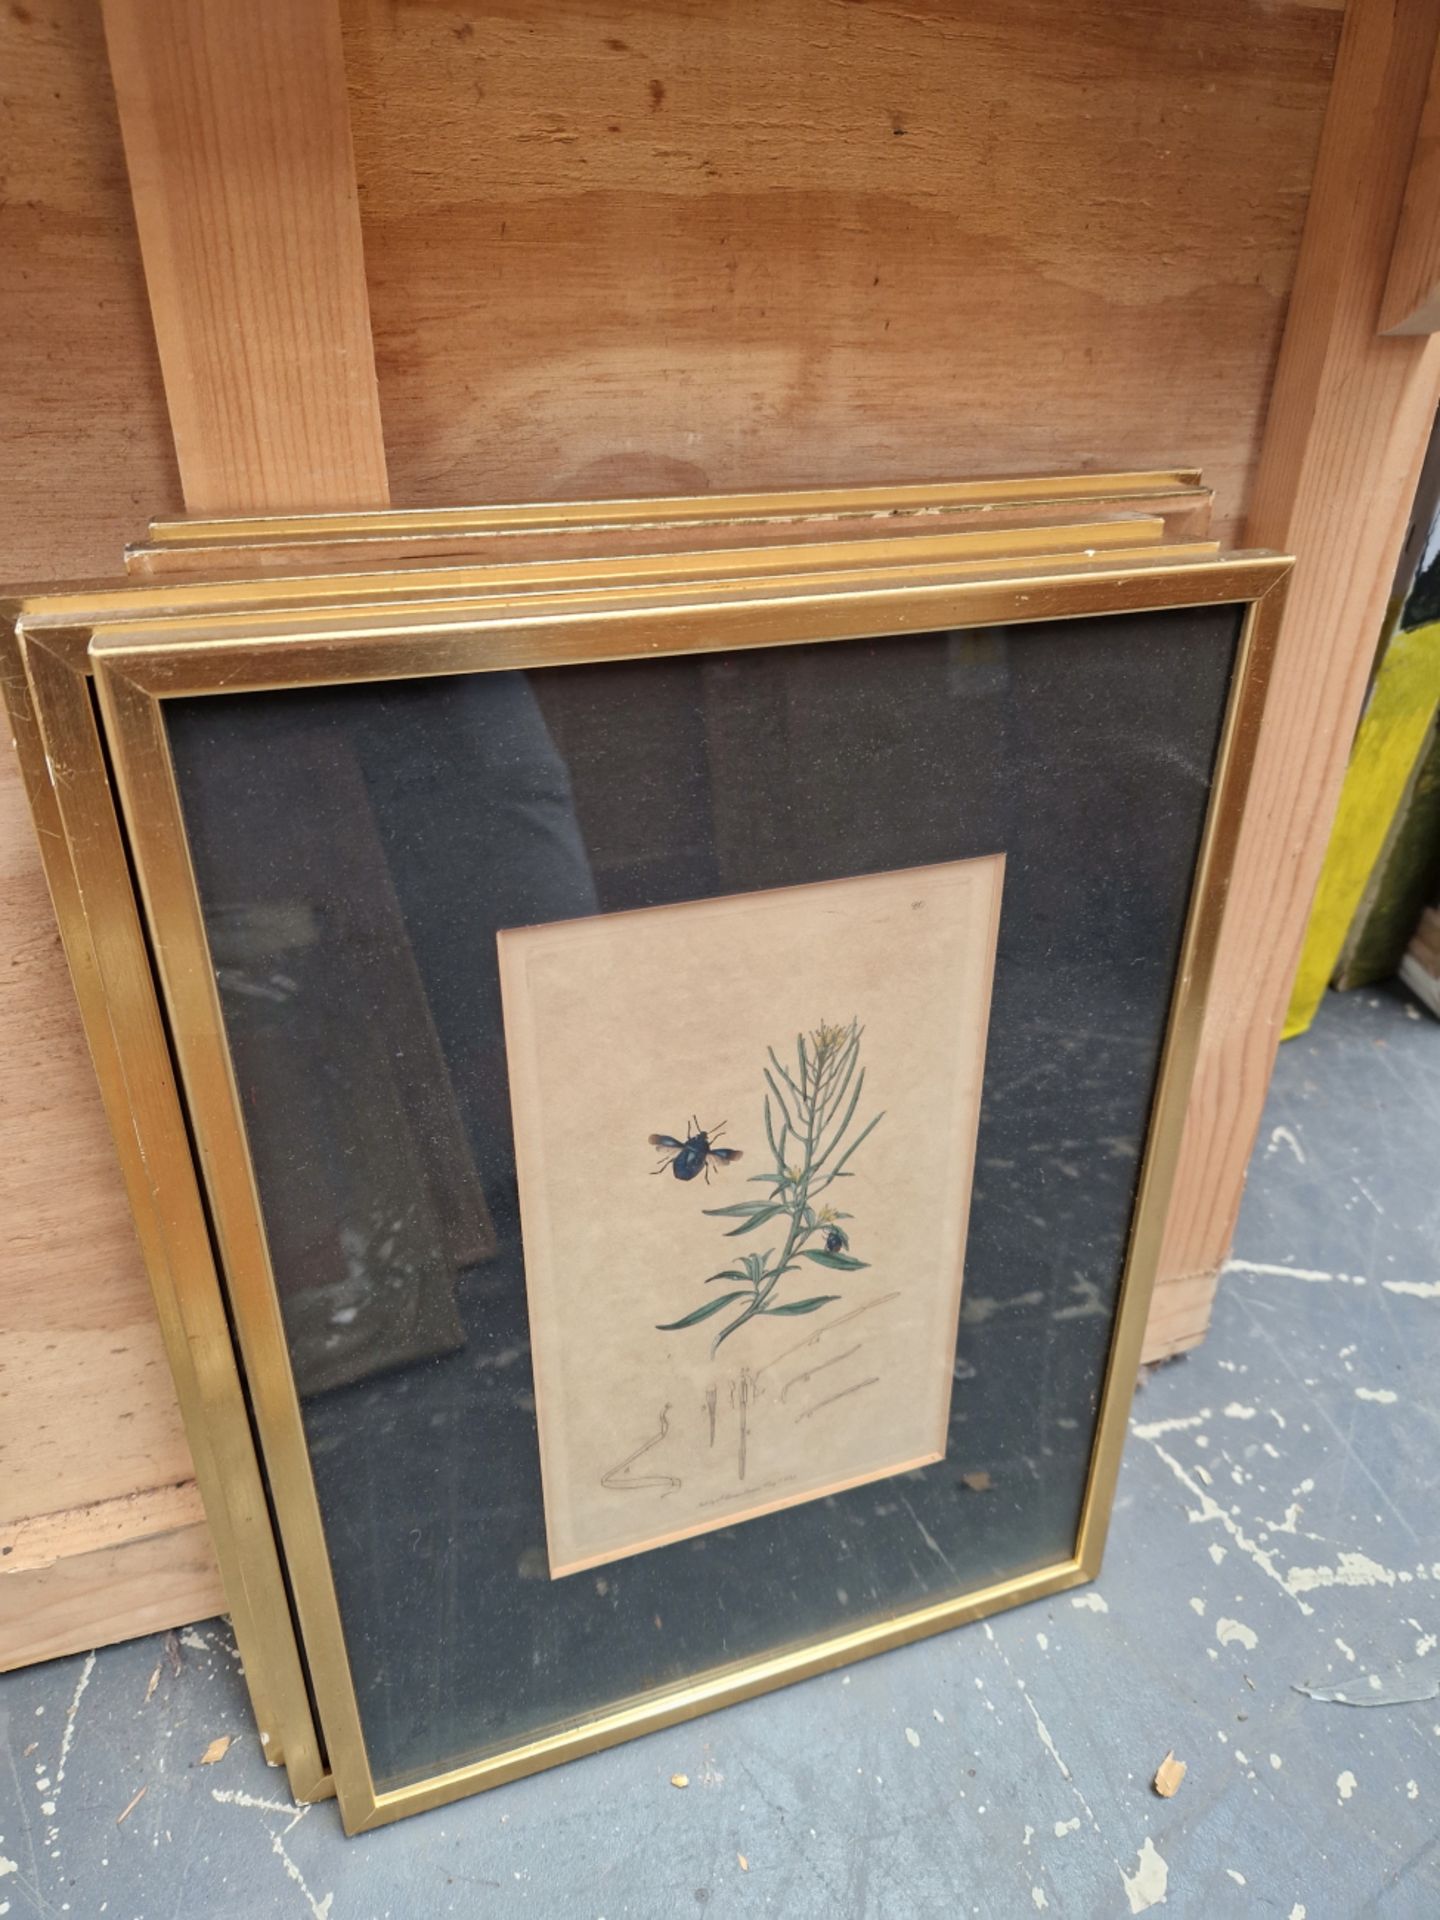 SIX 19th CENTURY HAND COLOURED BOTANICAL PRINTS, GILT FRAMES. TOGETHER WITH TWO WATERCOLOURS OF - Image 5 of 8